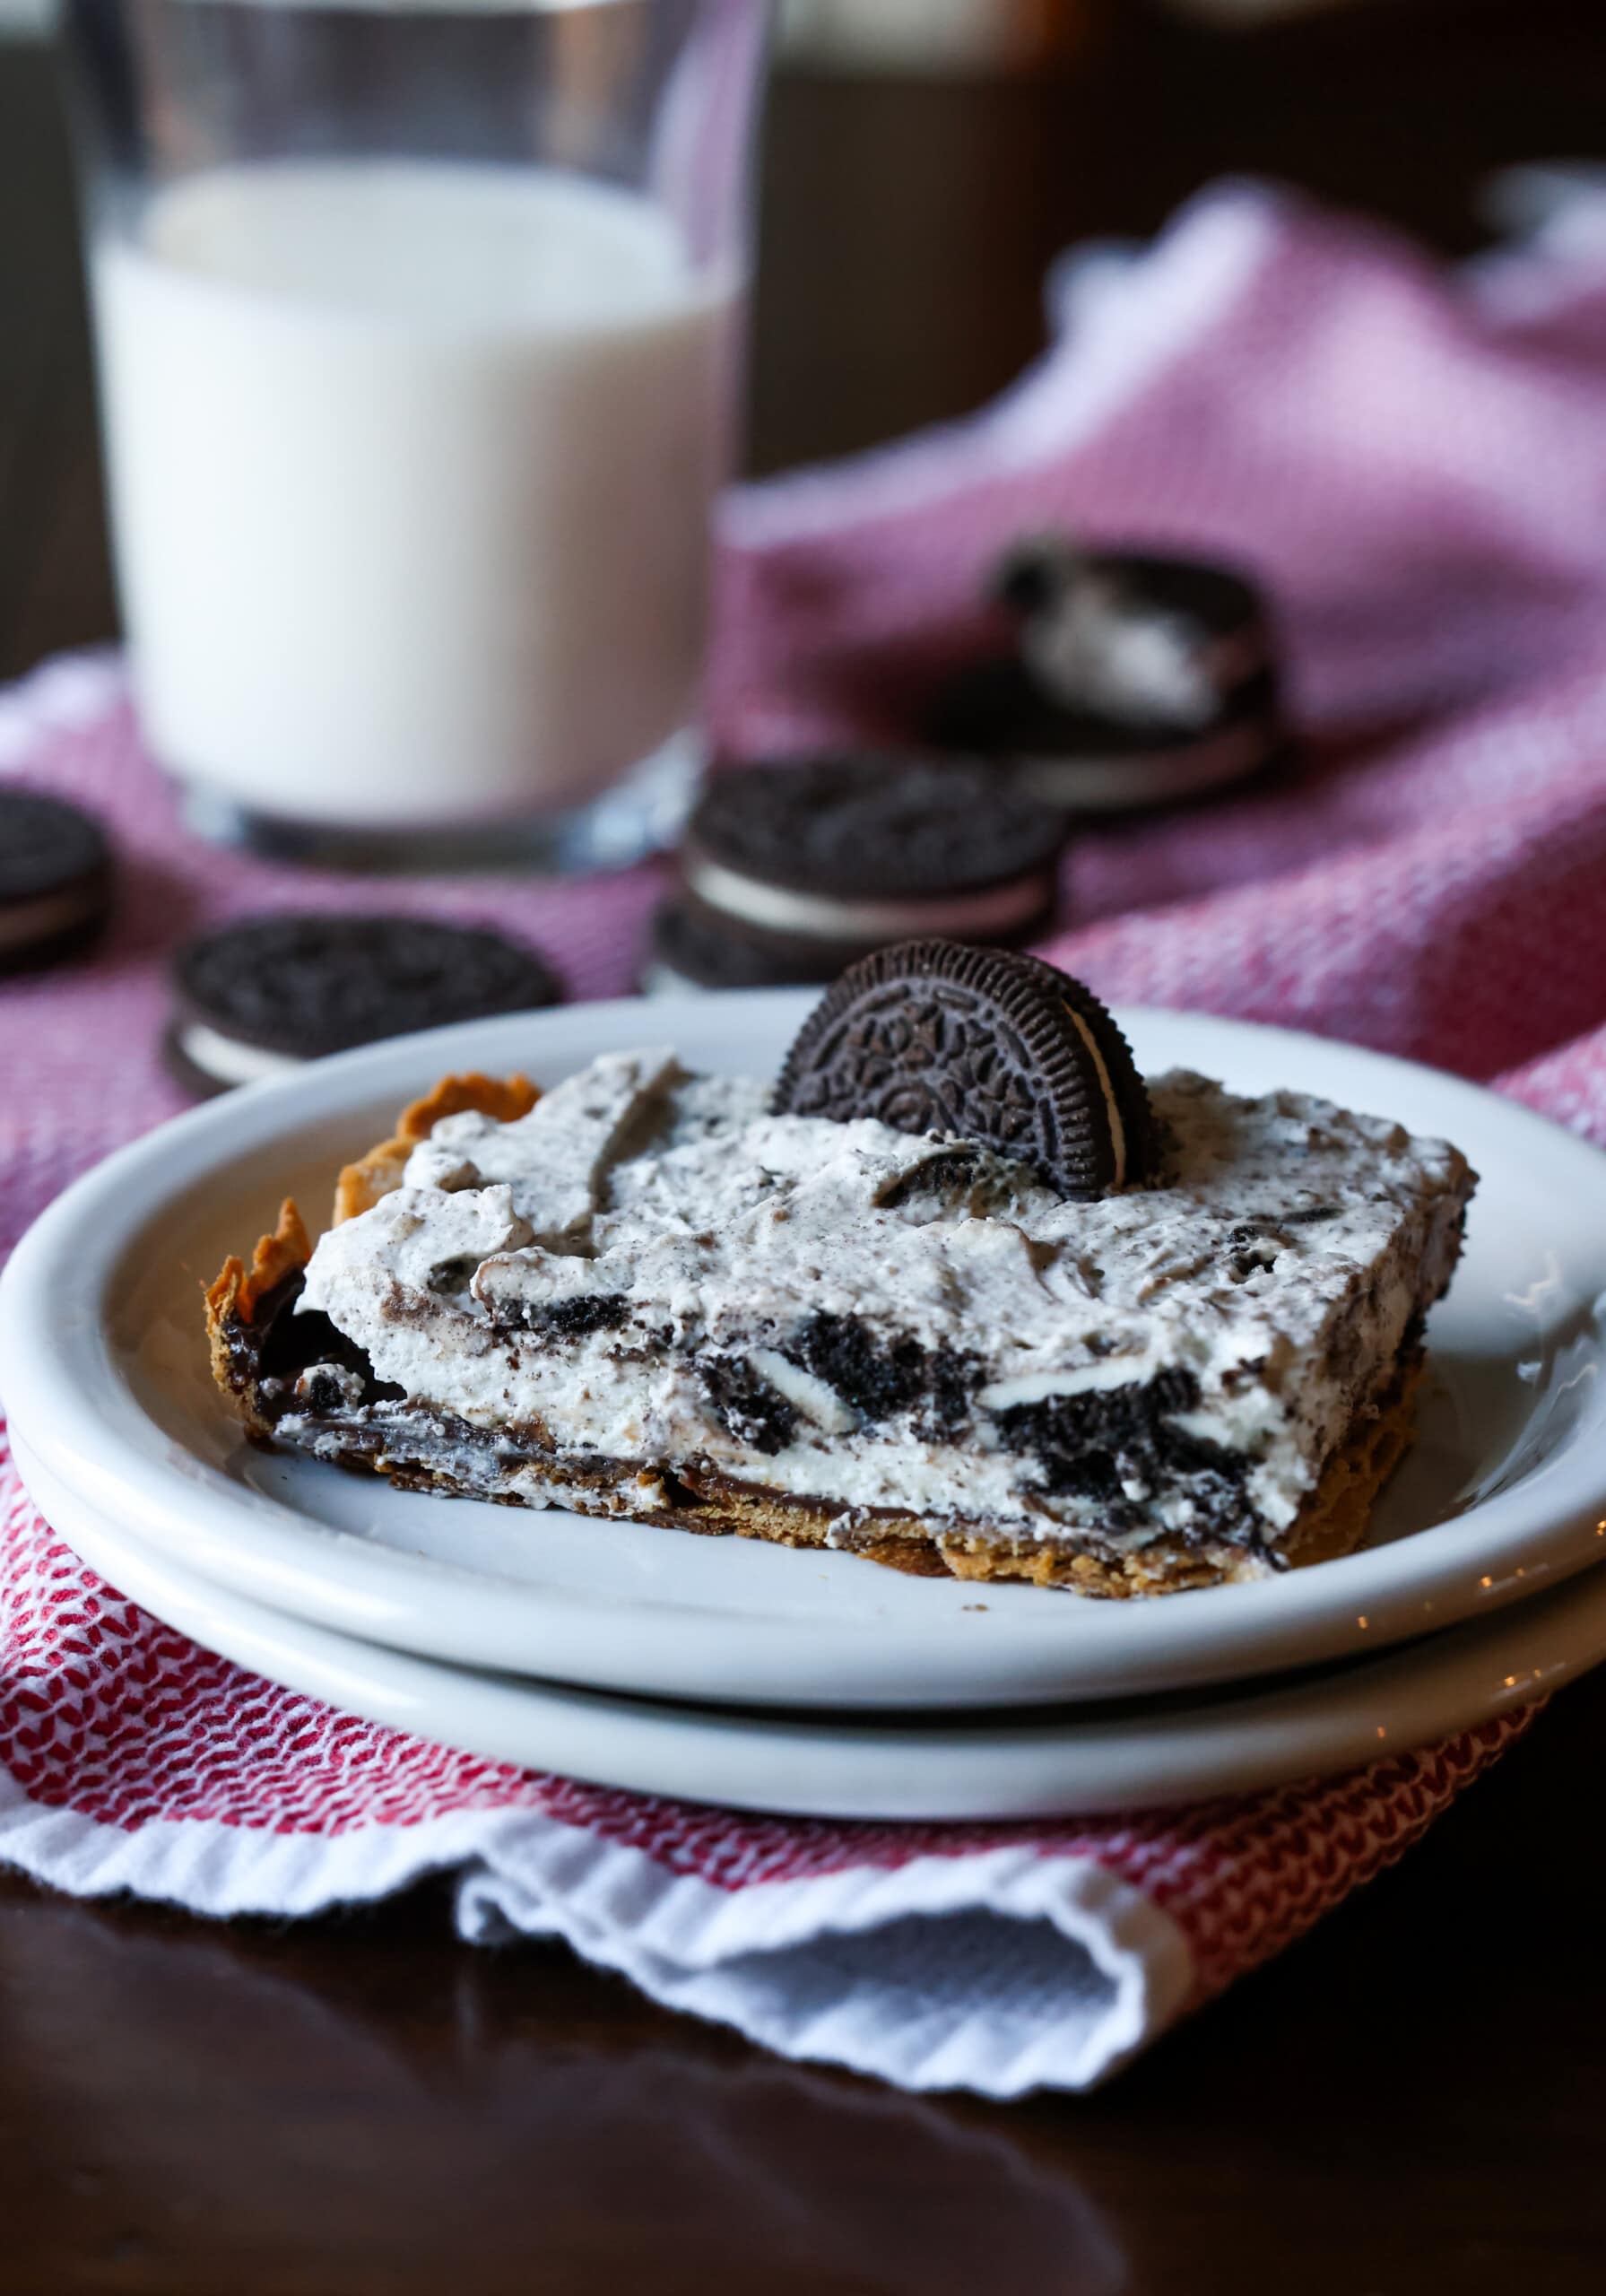 A slice of Oreo cheesecake pie on a plate